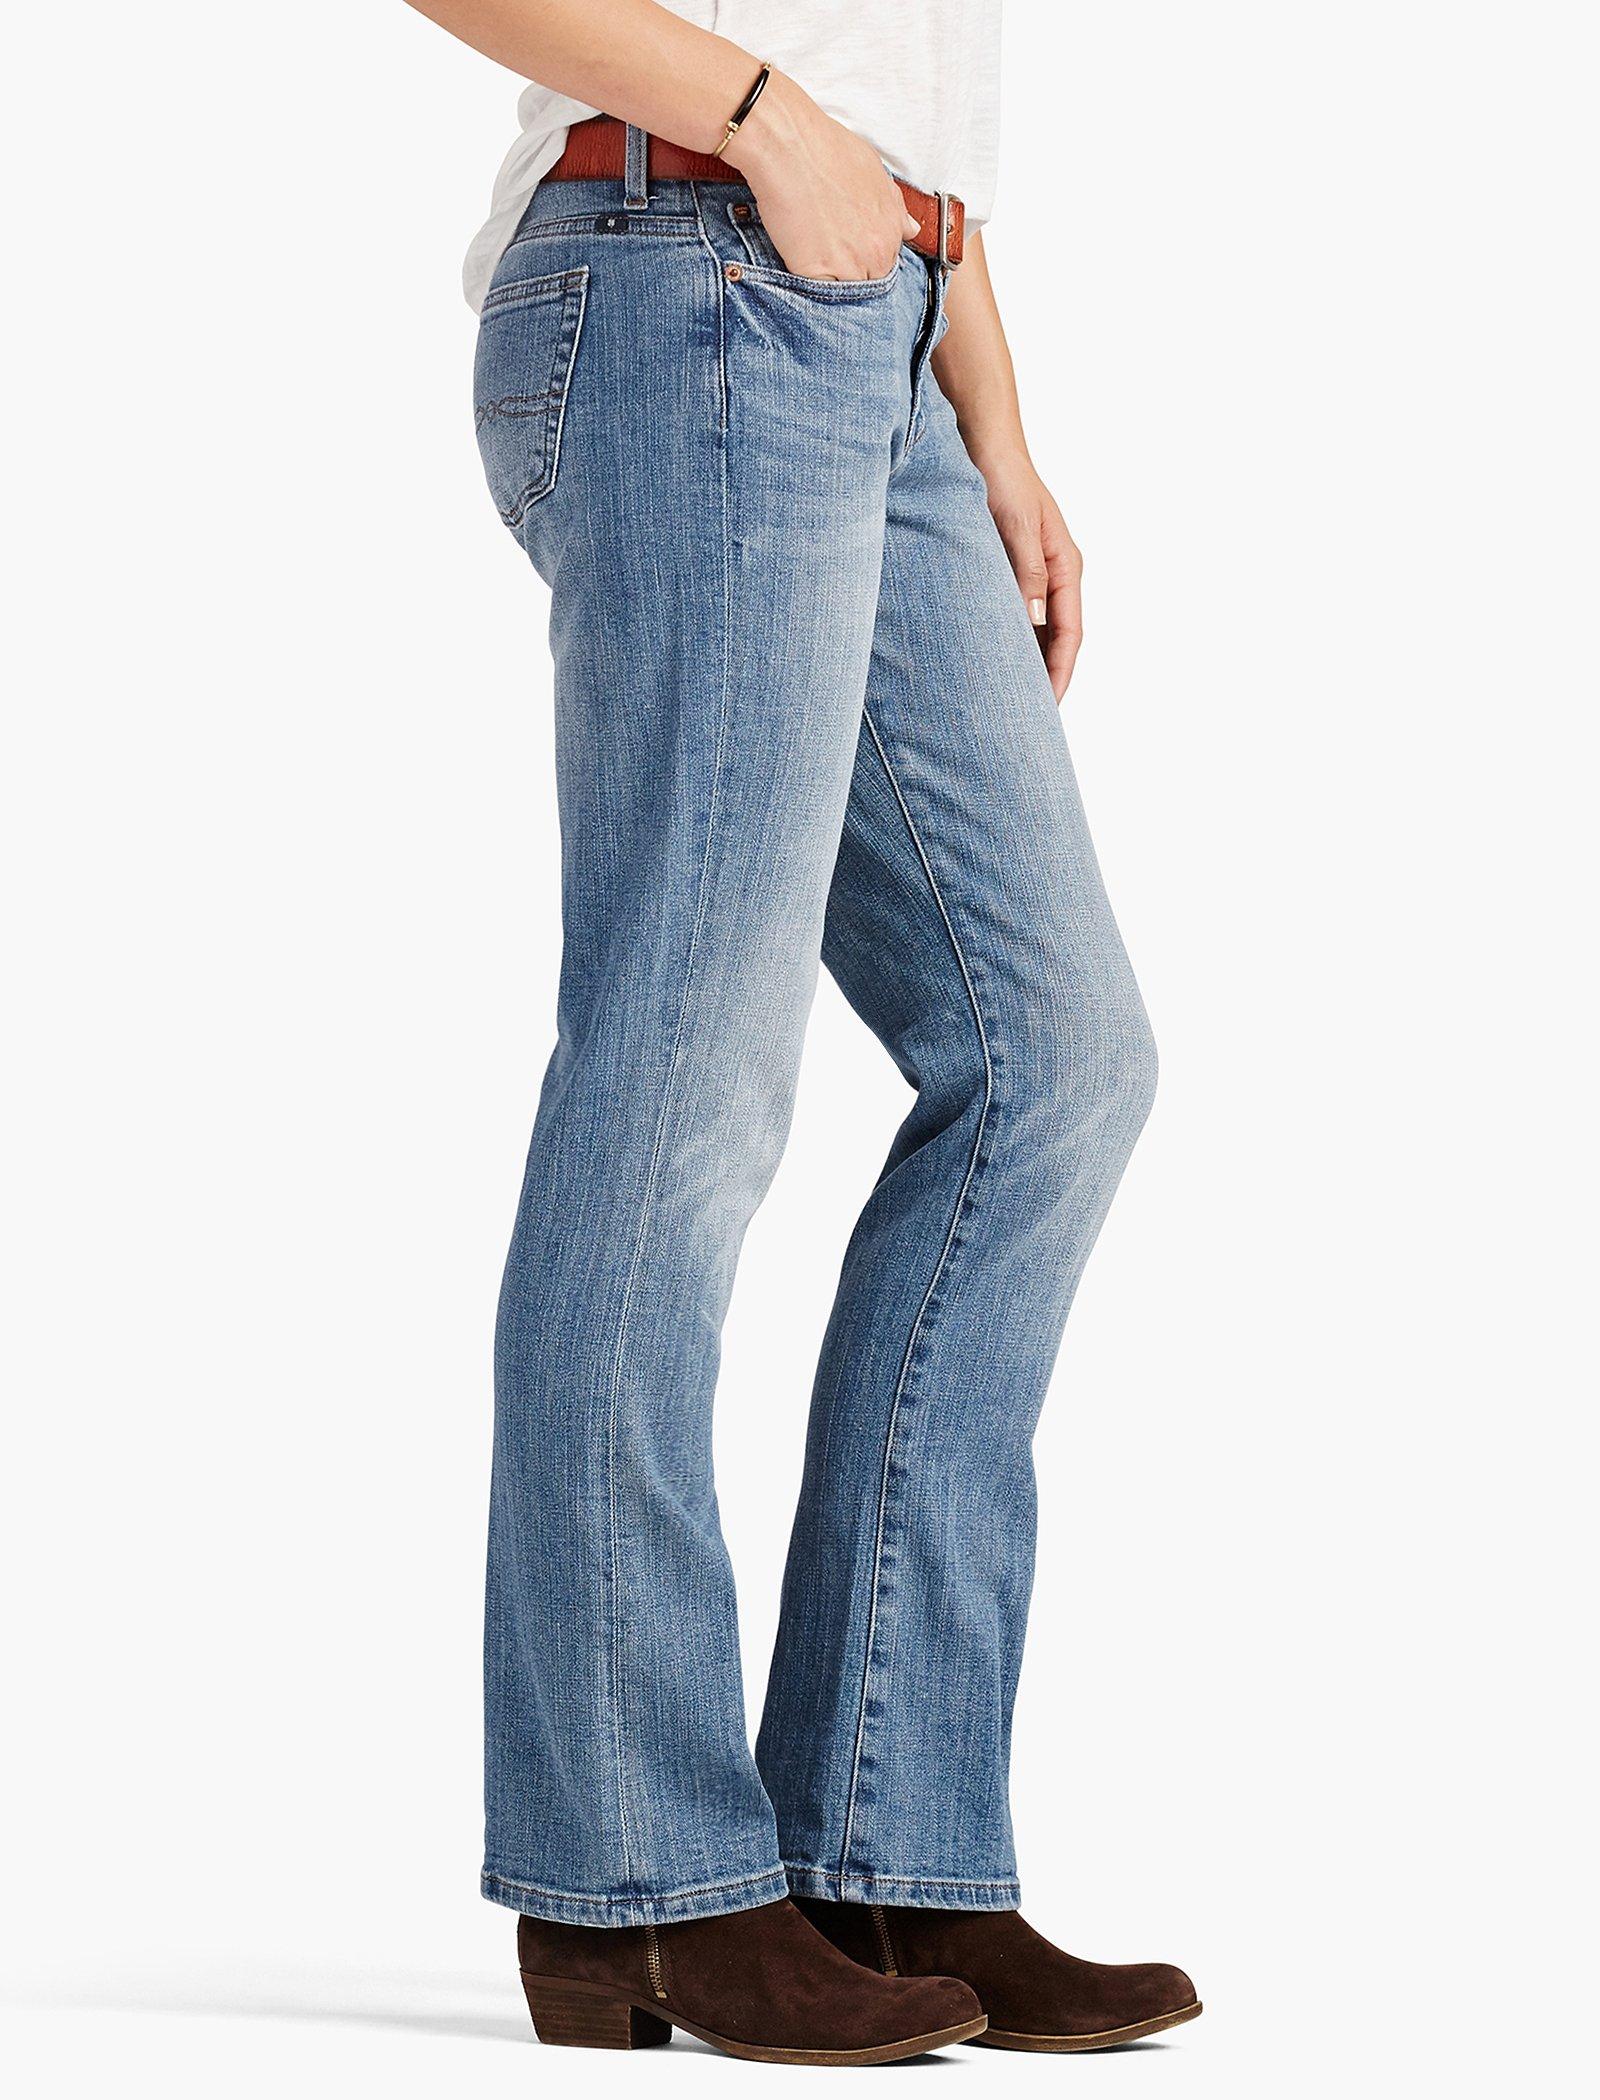 EASY RIDER RELAXED BOOTCUT JEAN IN DANVILLE | Lucky Brand